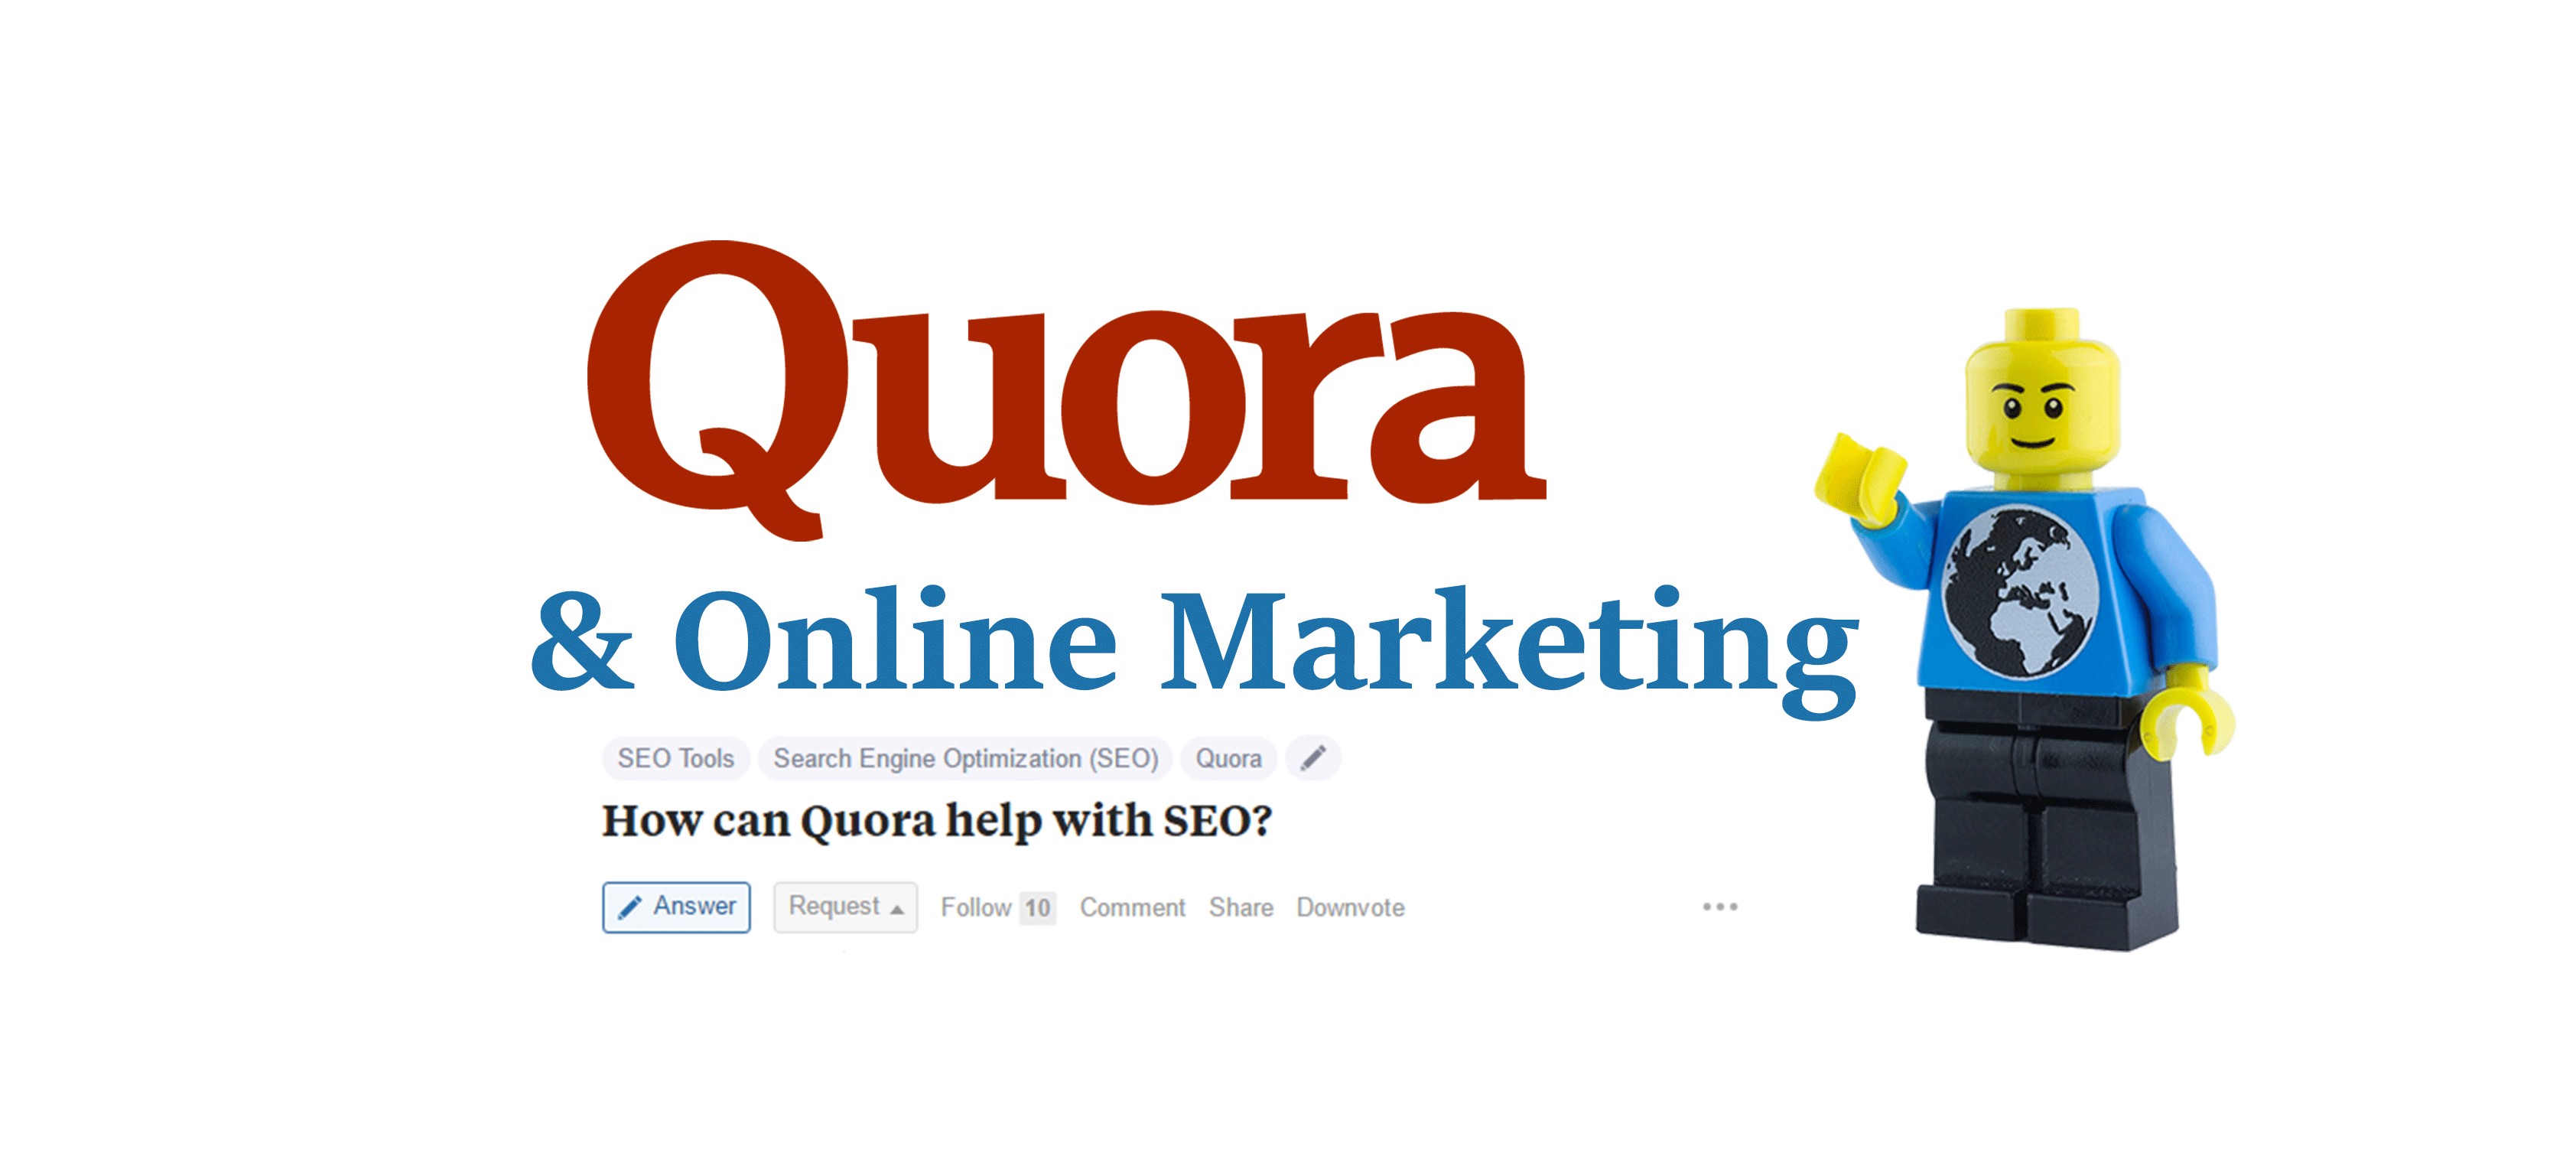 How To Use Quora For SEO & Online Marketing